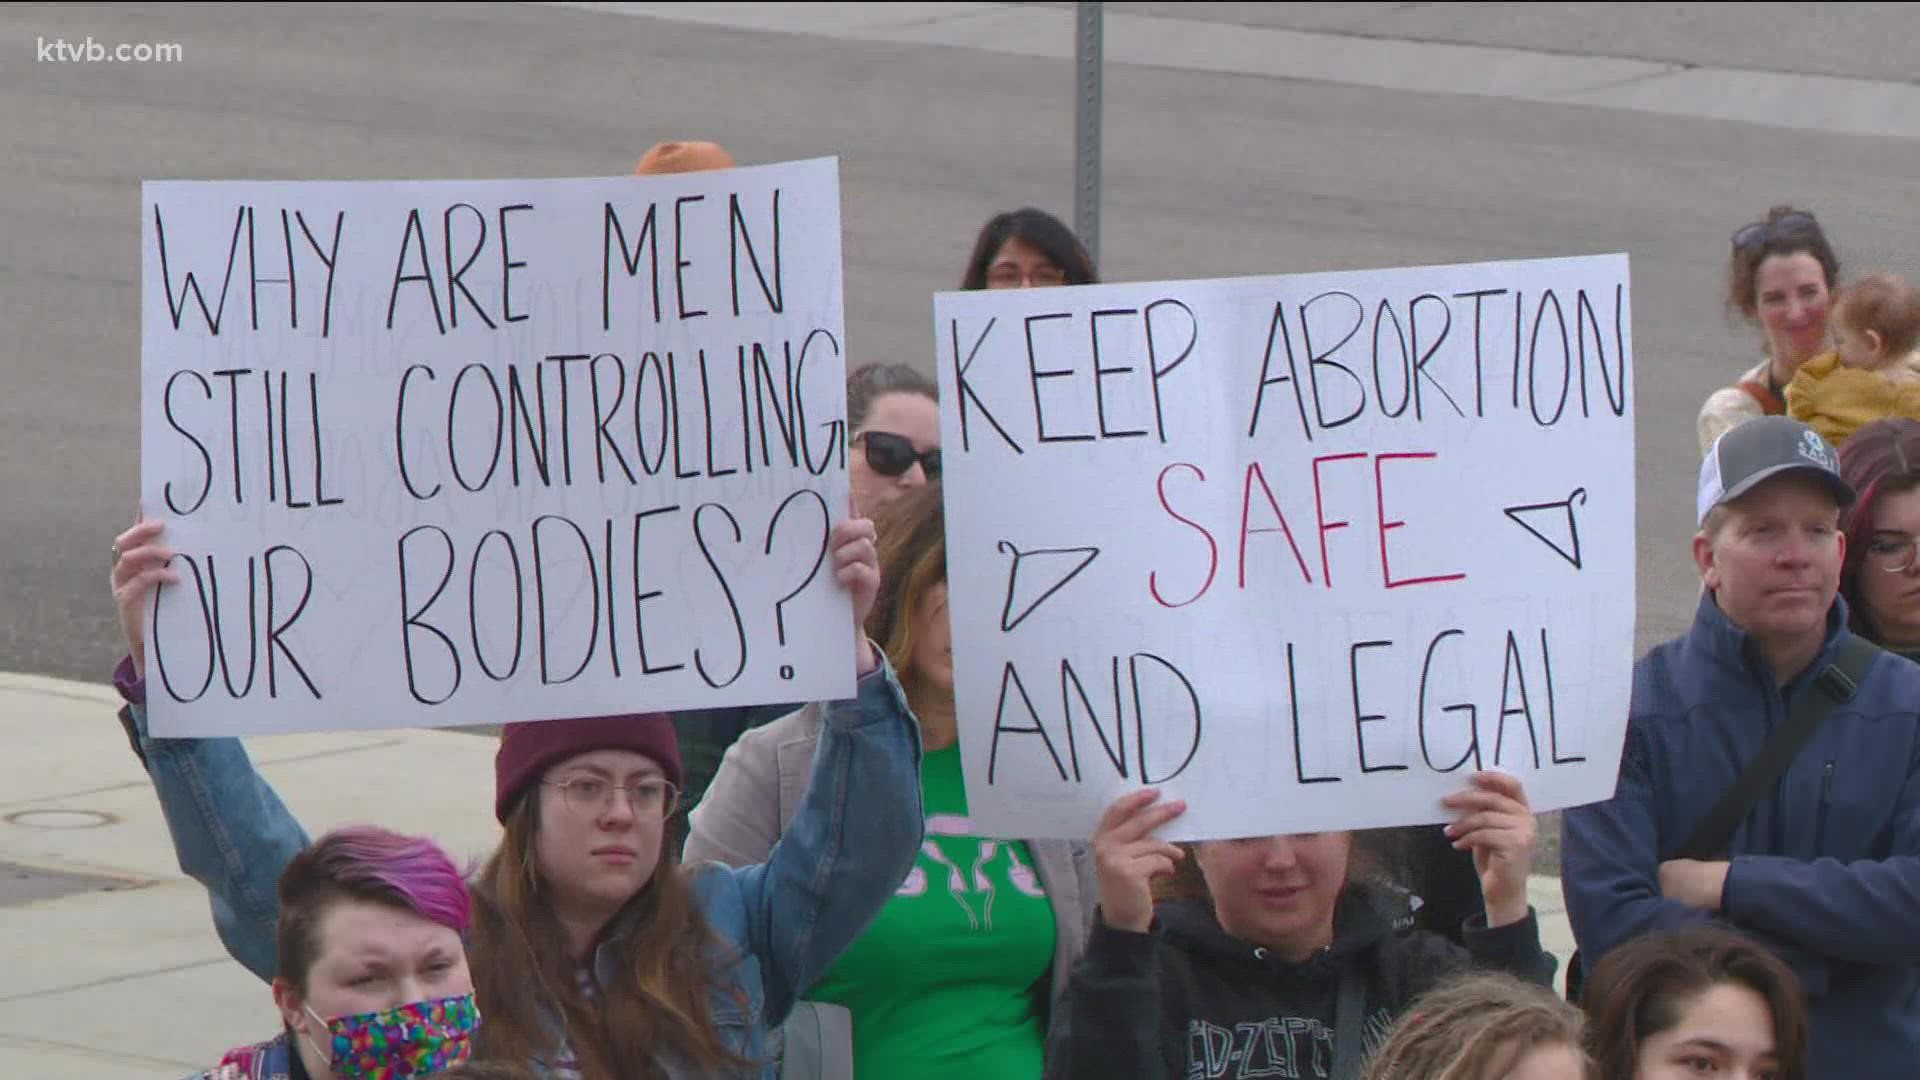 People gathered at the state capitol in response to senate bill 1309 which, if signed into law, would make abortions illegal after six weeks.